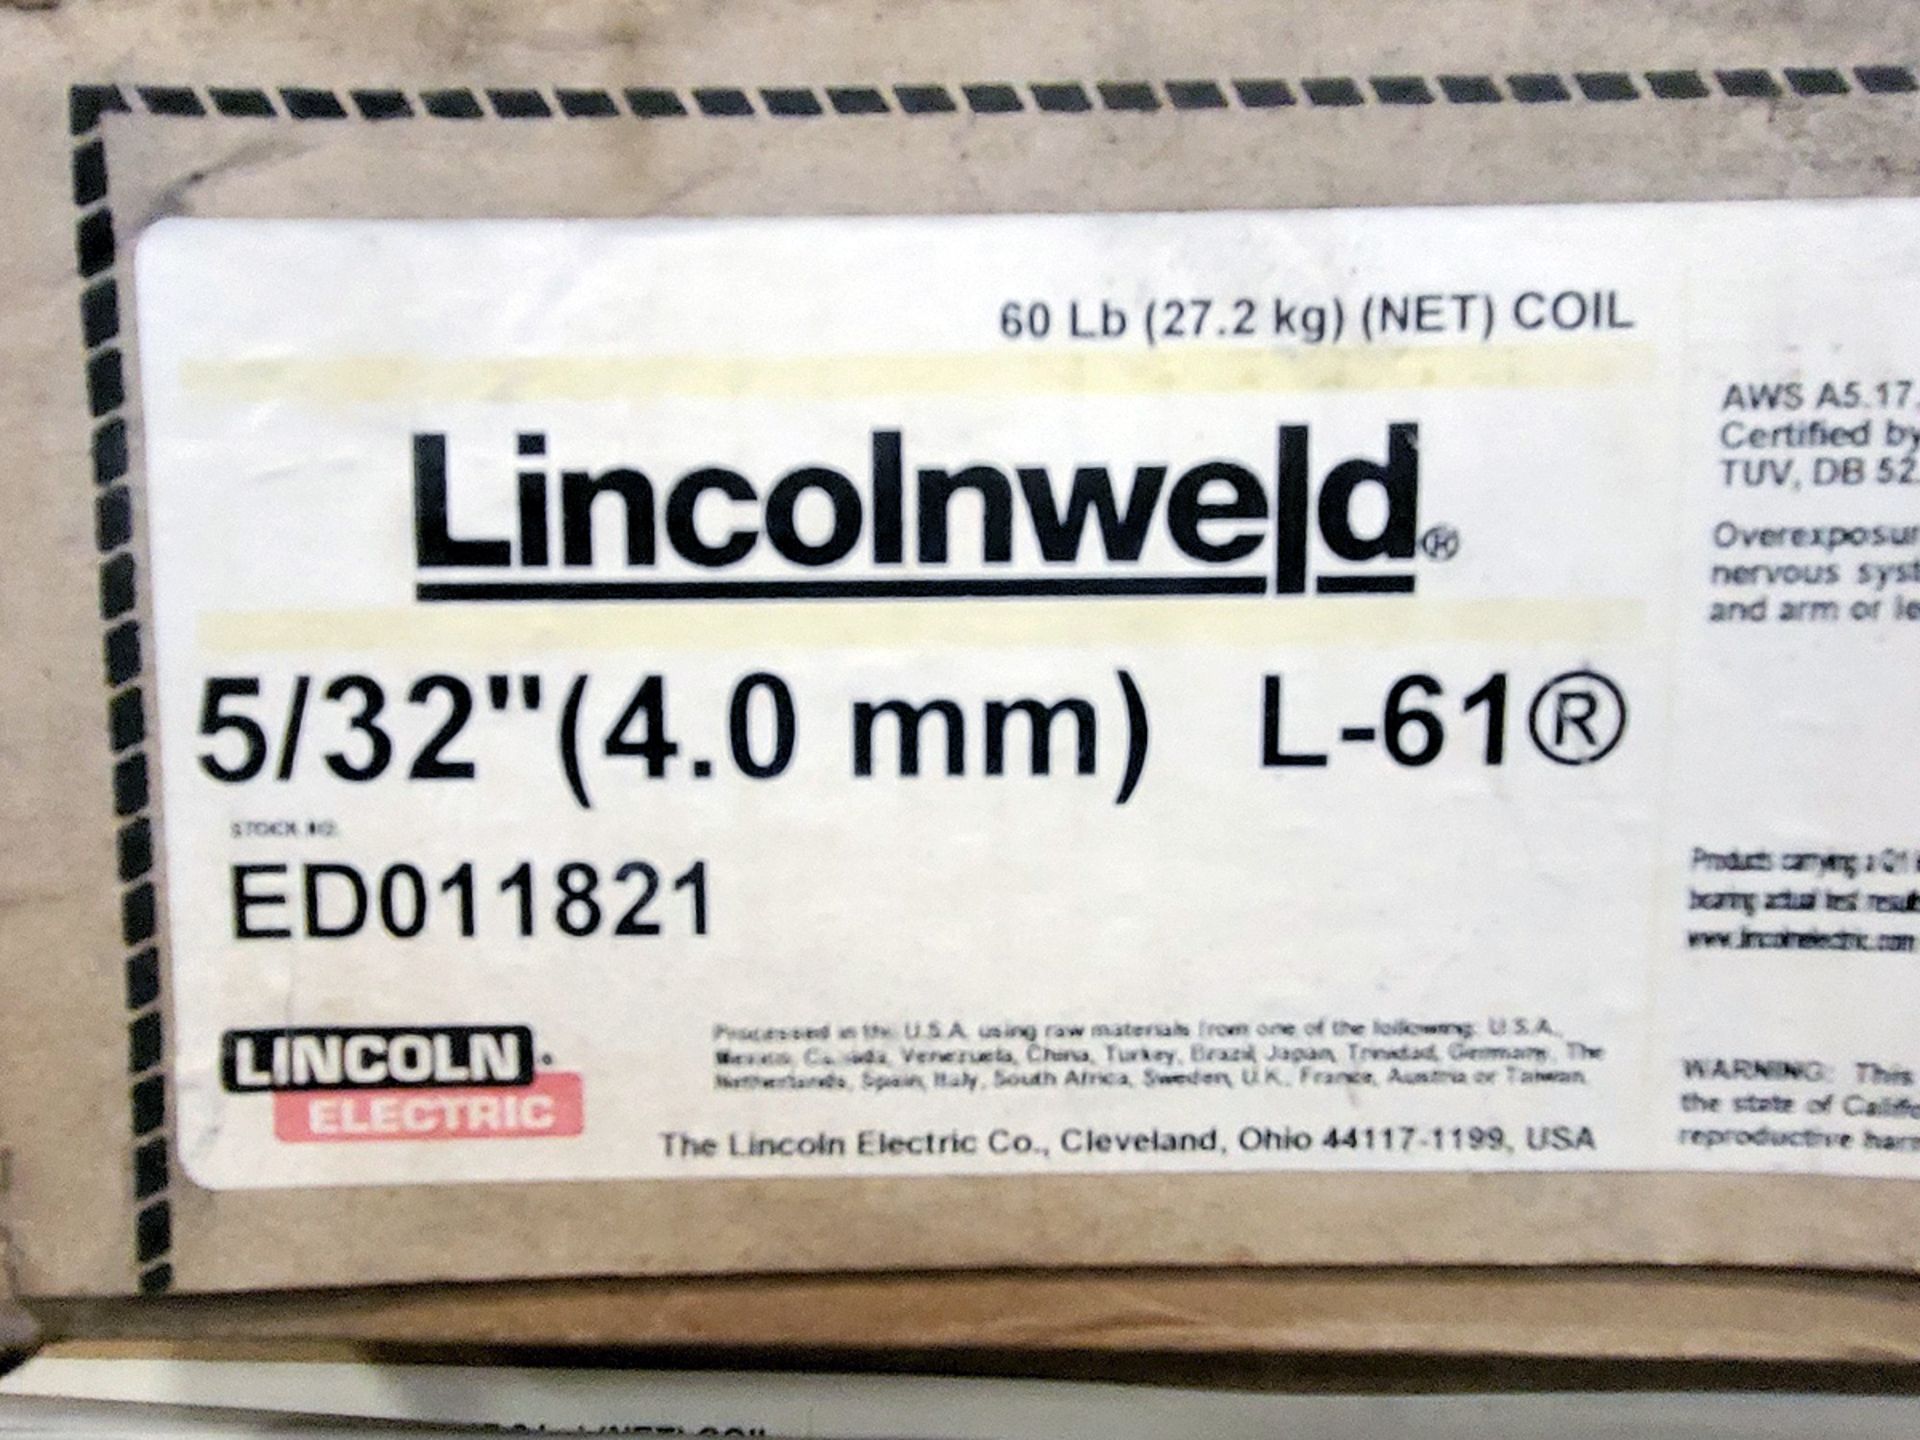 [Each] Box of Lincolnweld 5/32" (4.0mm) L-61 ED011821 Welding Wire (60Lbs.) - Image 2 of 2